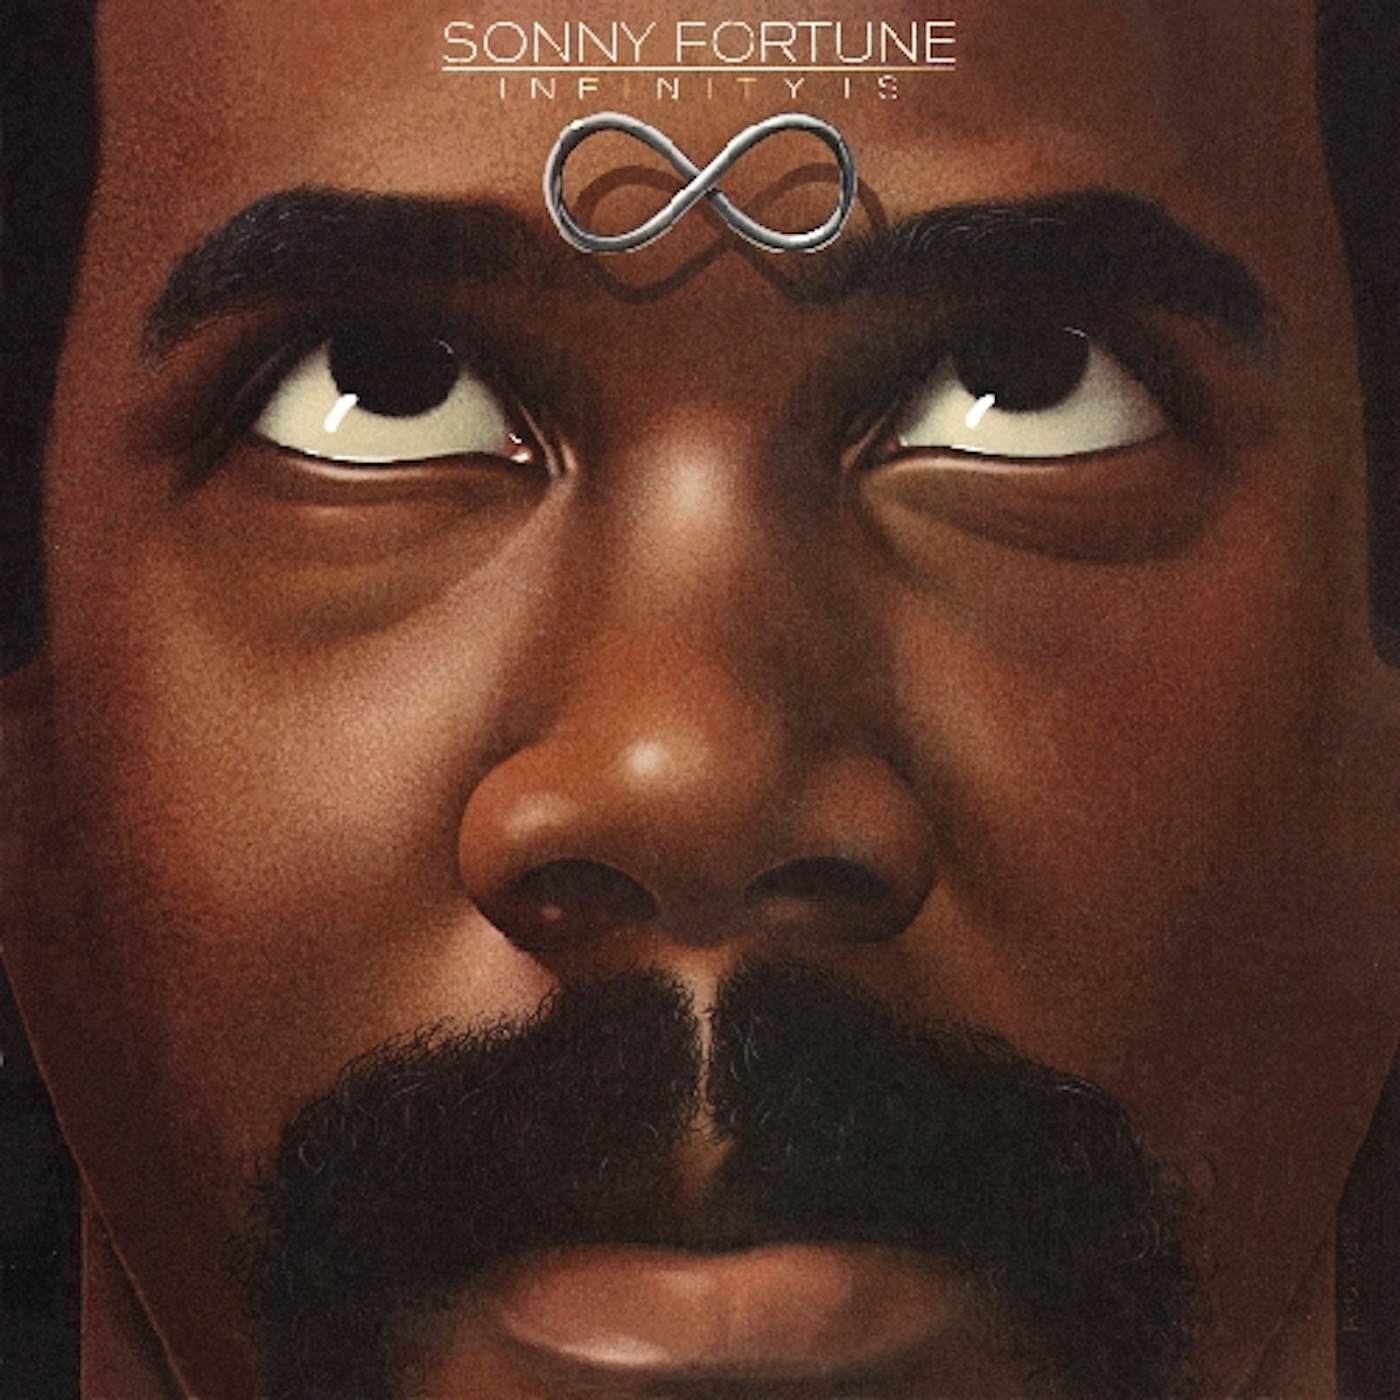 Sonny Fortune INFINITY IS CD